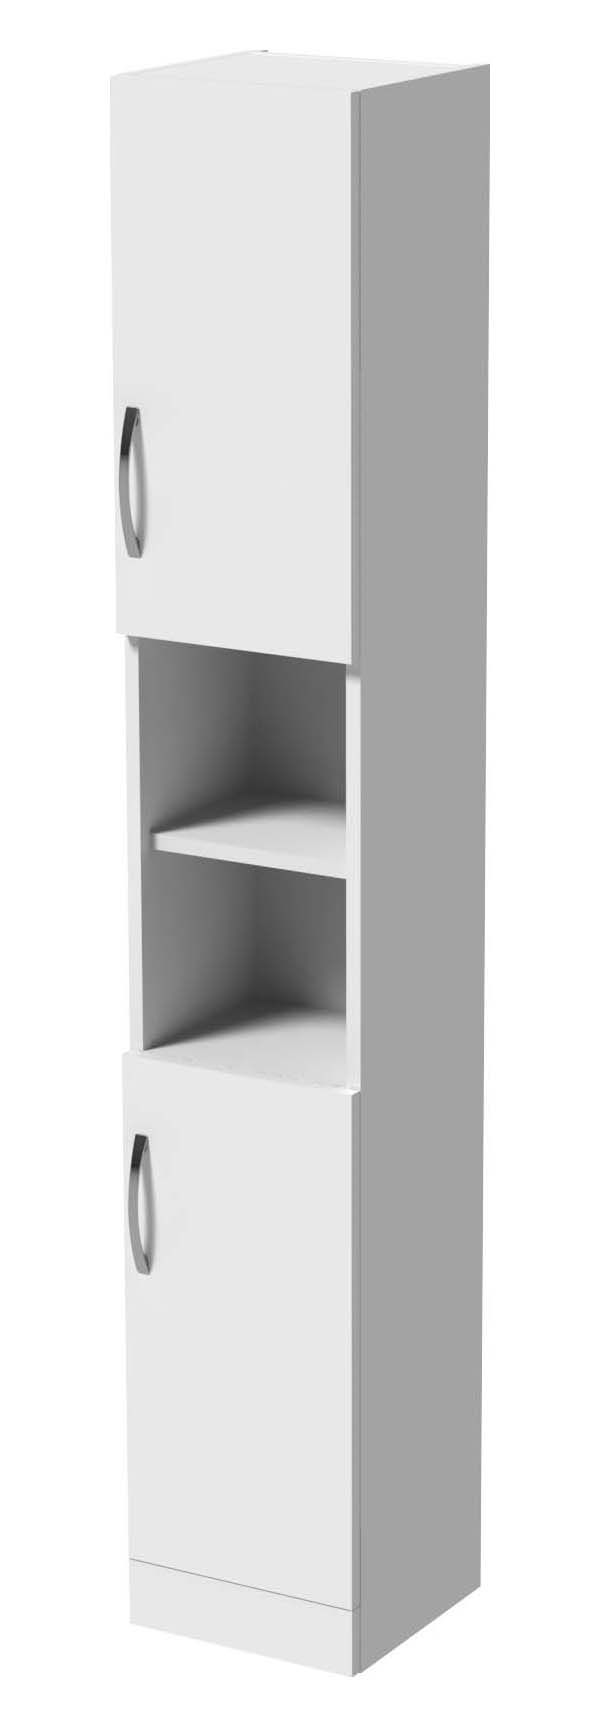 Wickes White Gloss Tall Tower Storage Unit - 1800 x 300mm